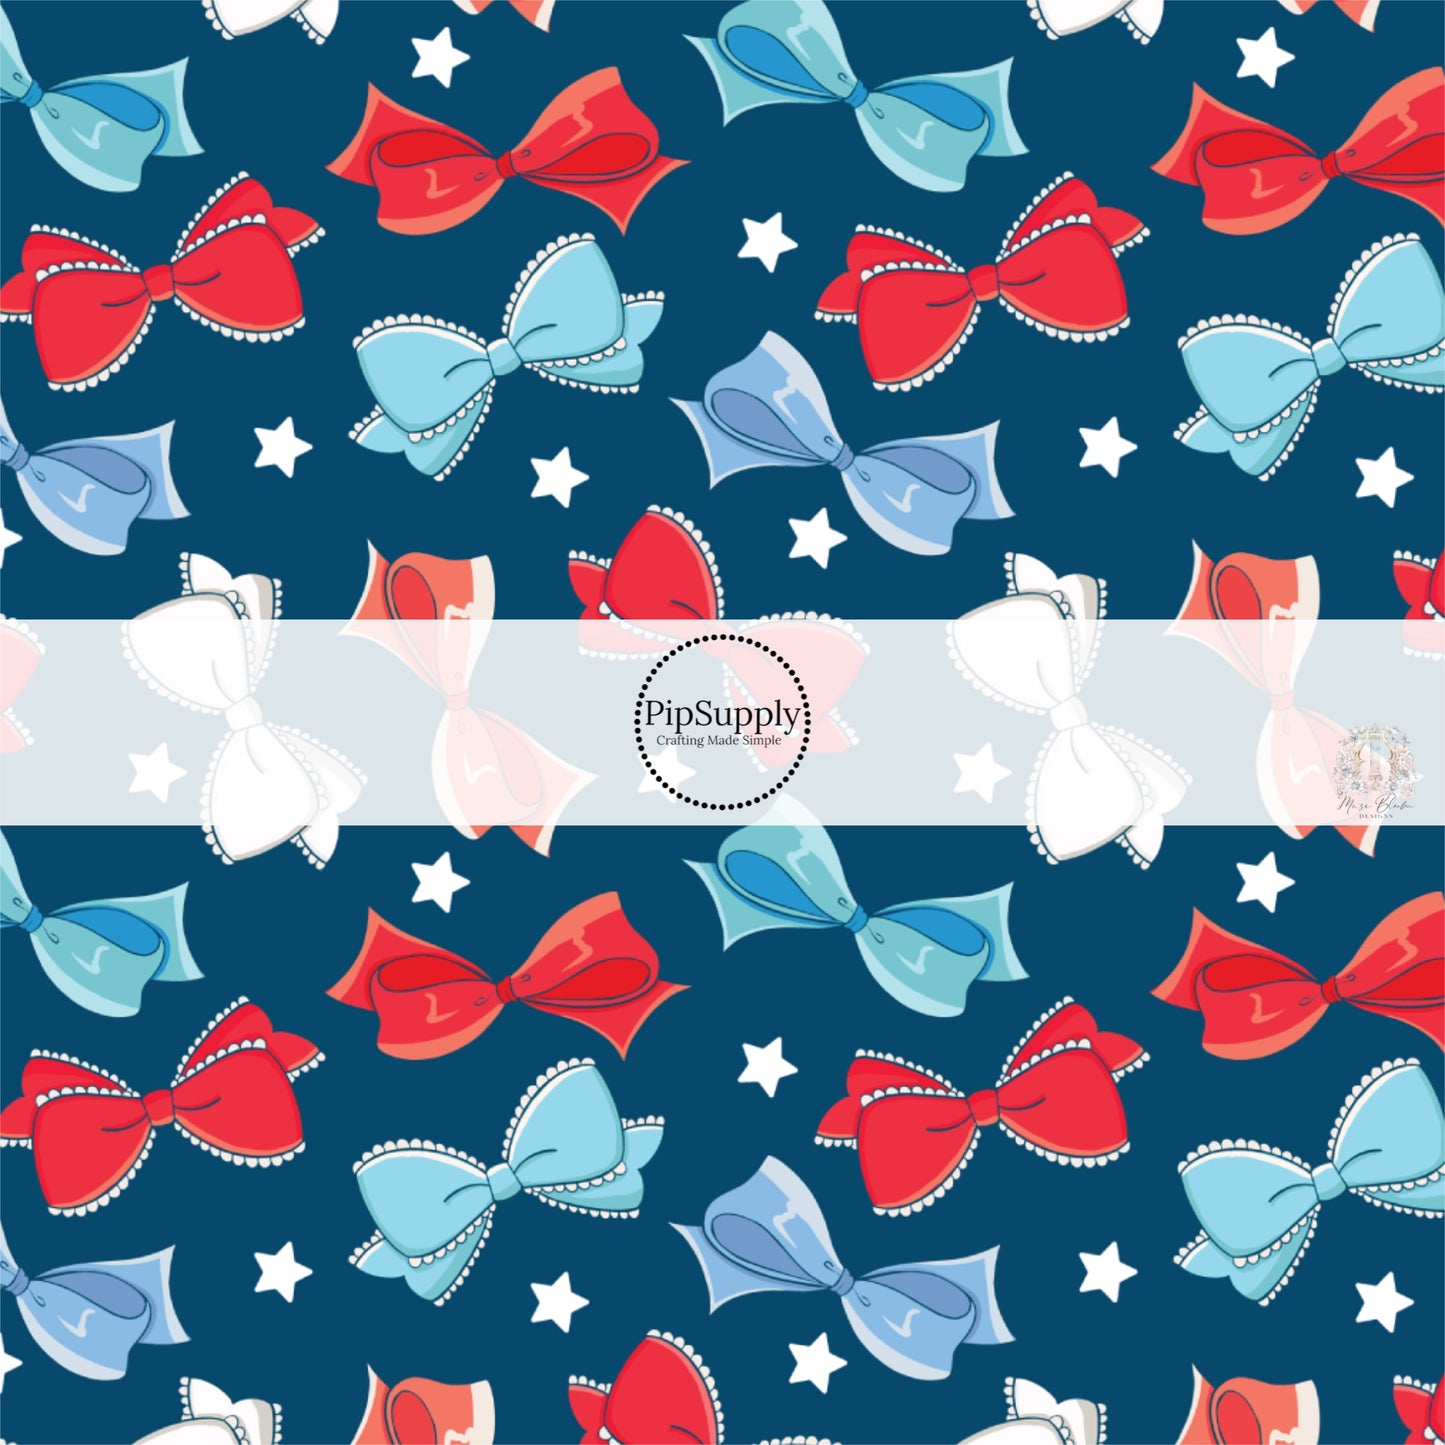 This 4th of July fabric by the yard features red, white, and blue bows on dark blue. This fun patriotic themed fabric can be used for all your sewing and crafting needs!